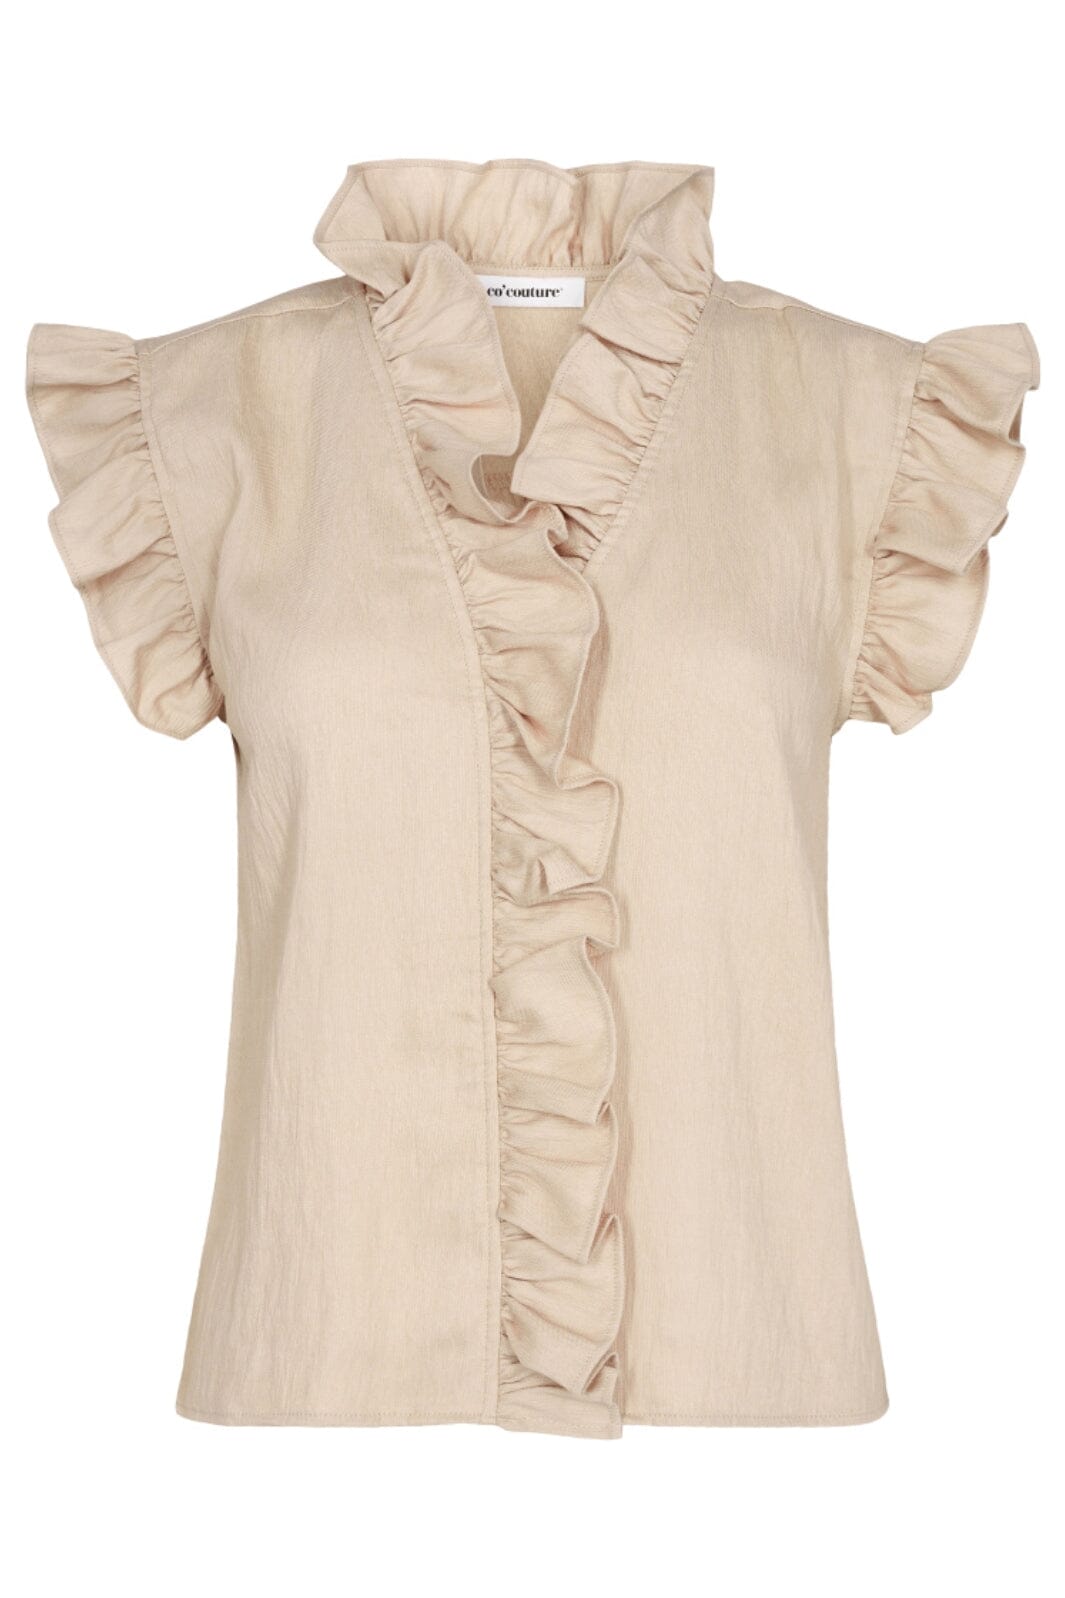 Co´couture - Suedacc Frill Top 35213 - 199 Bone Toppe 